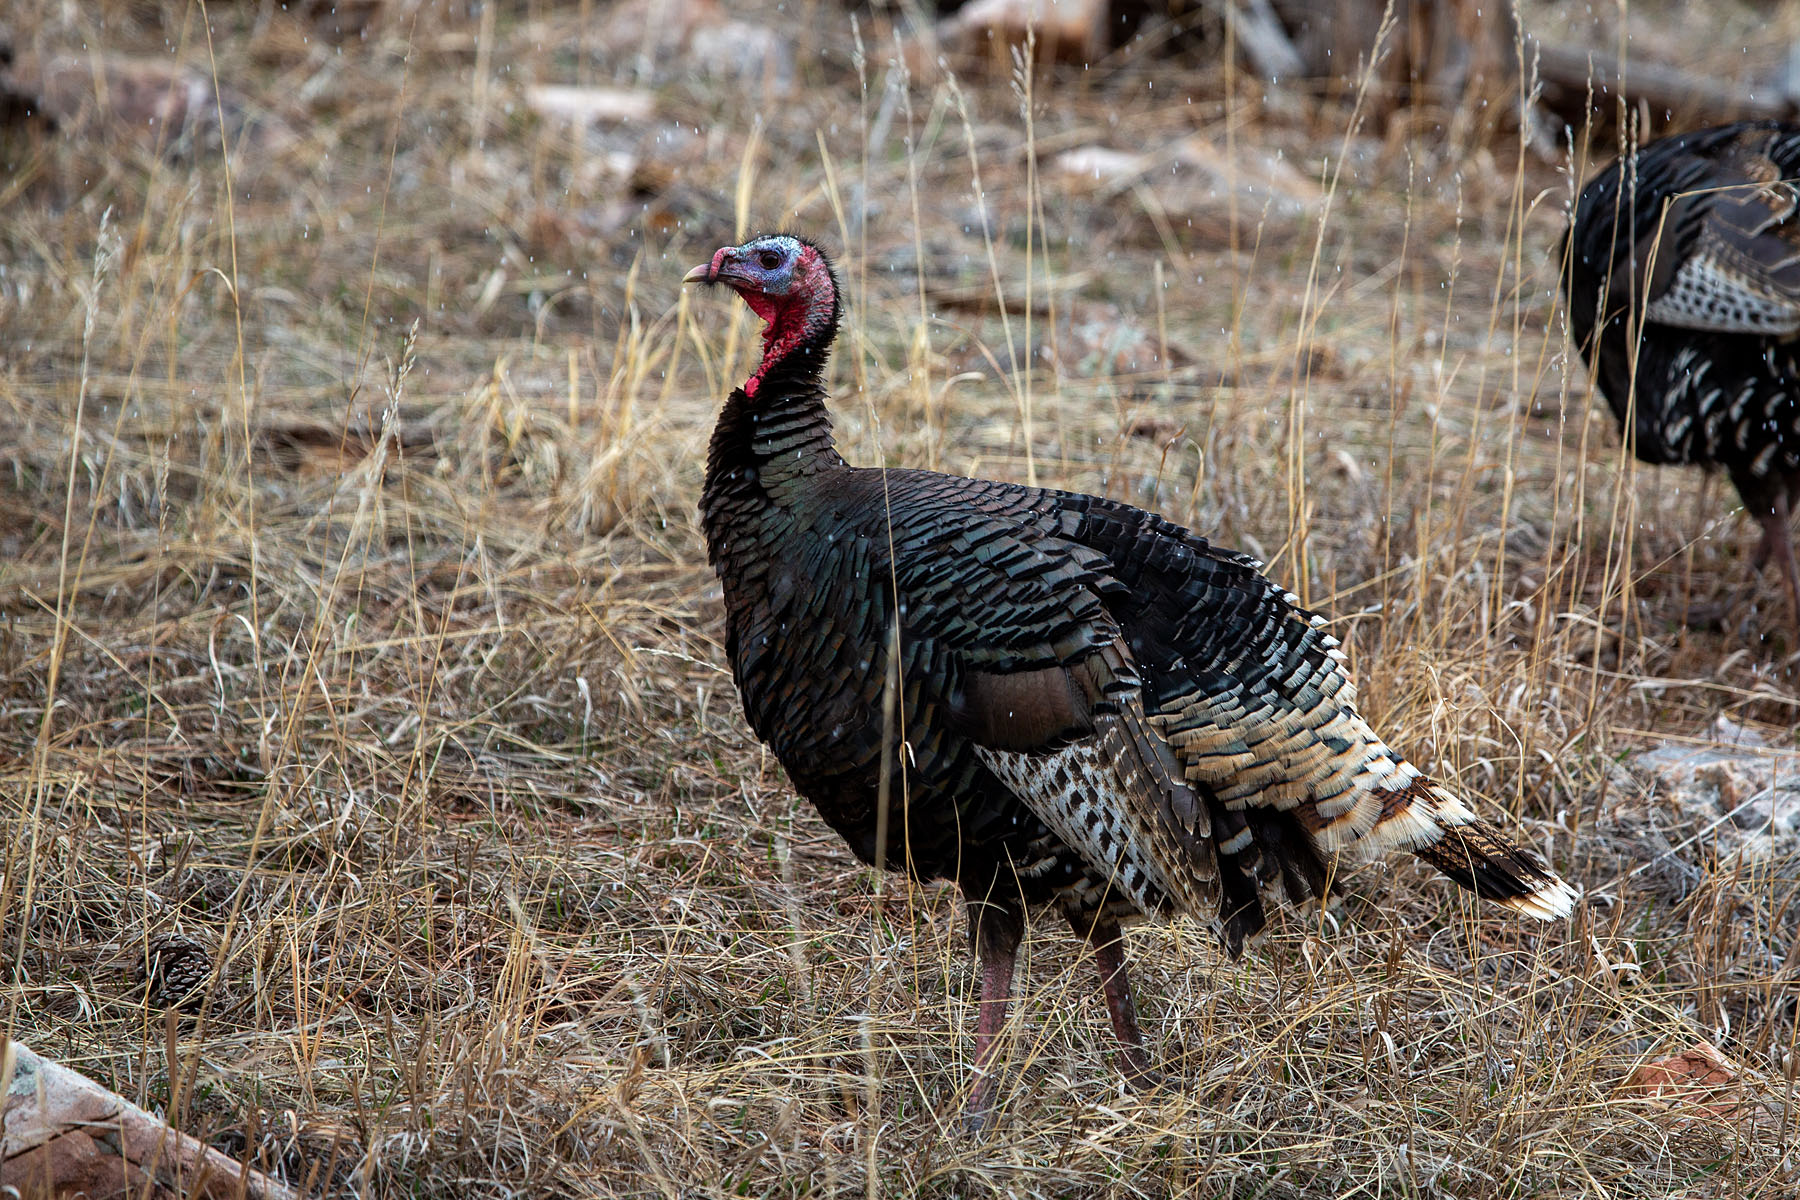 Turkey, Custer State Park.  Click for next photo.